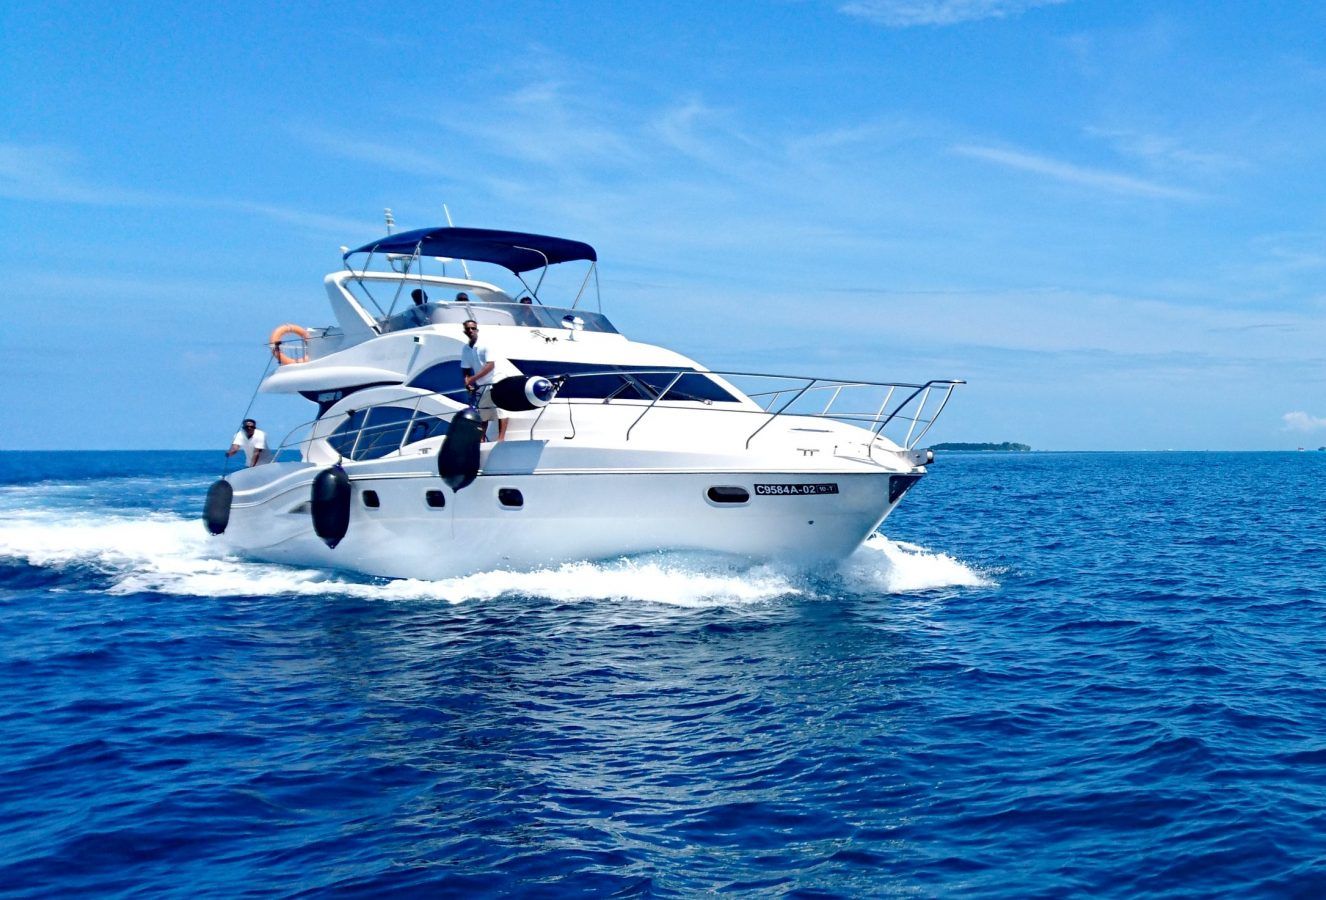 The Best Private Yacht Charters in South East Asia for Small Groups